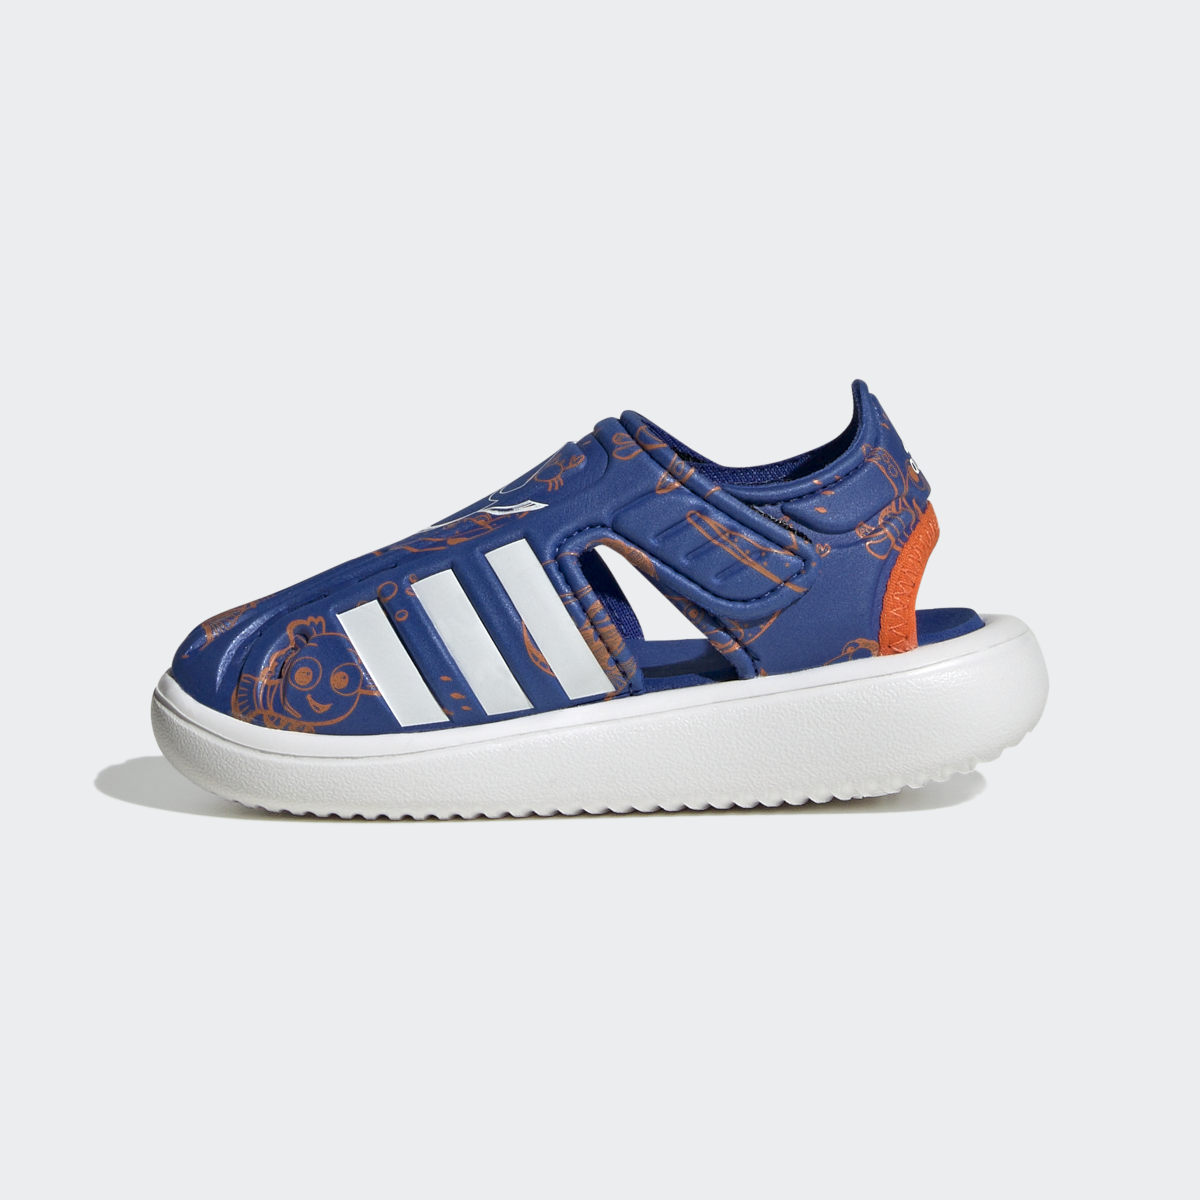 Adidas Sandali Finding Nemo and Dory Closed Toe Summer Water. 7